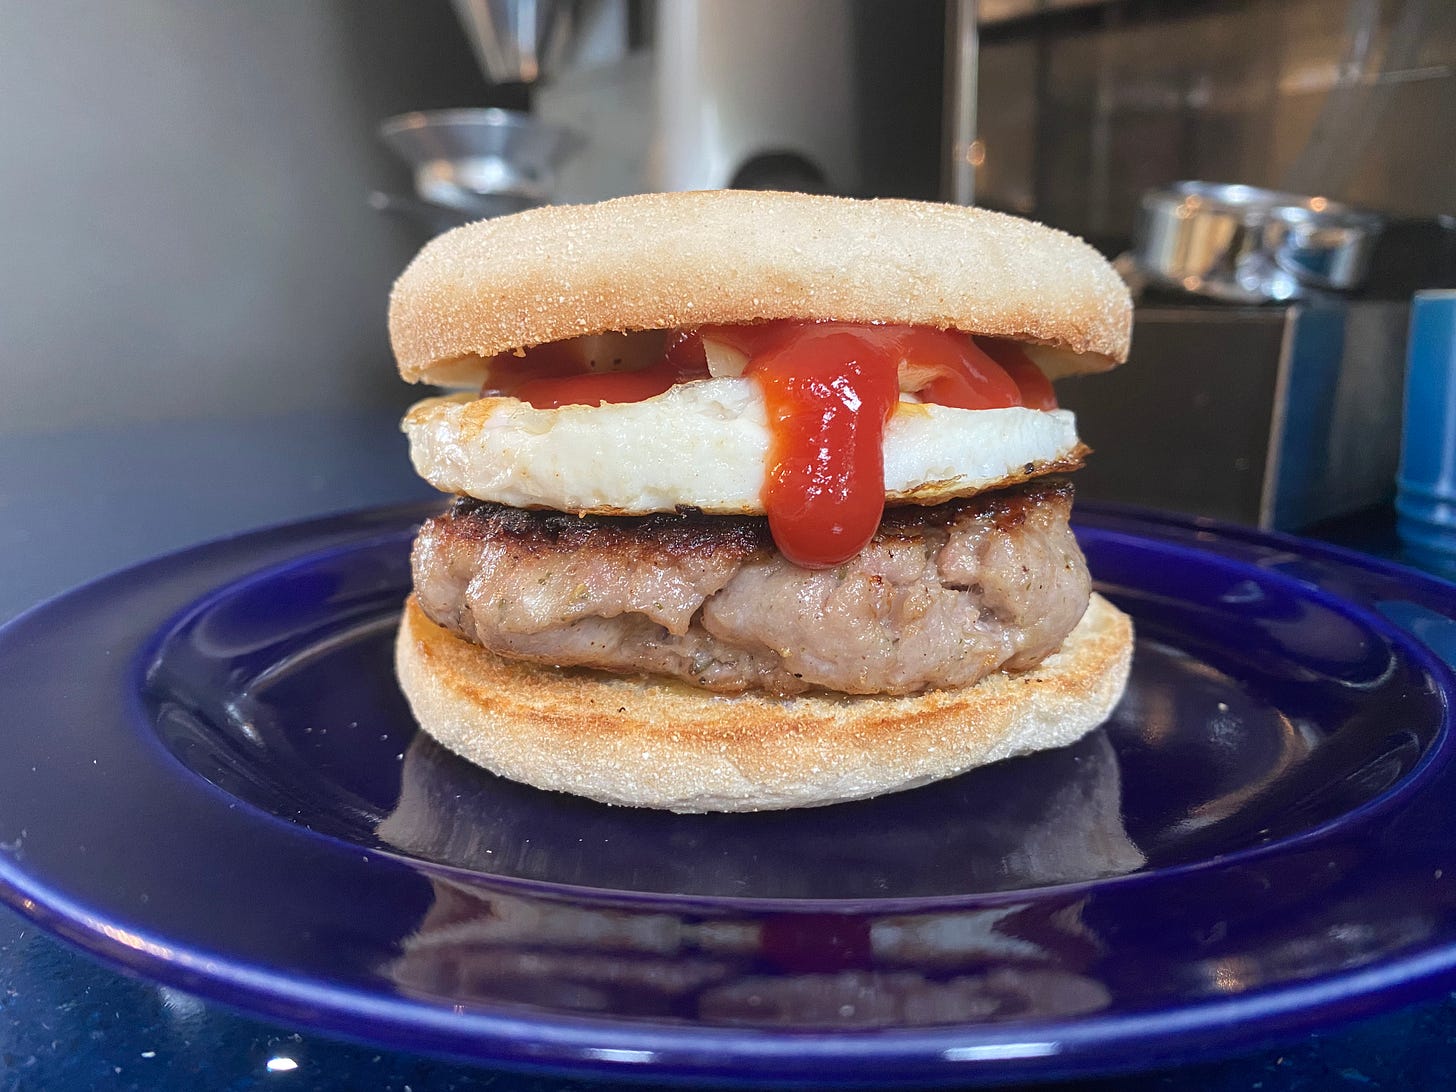 Sausage, egg and ketchup between two pieces of English muffin